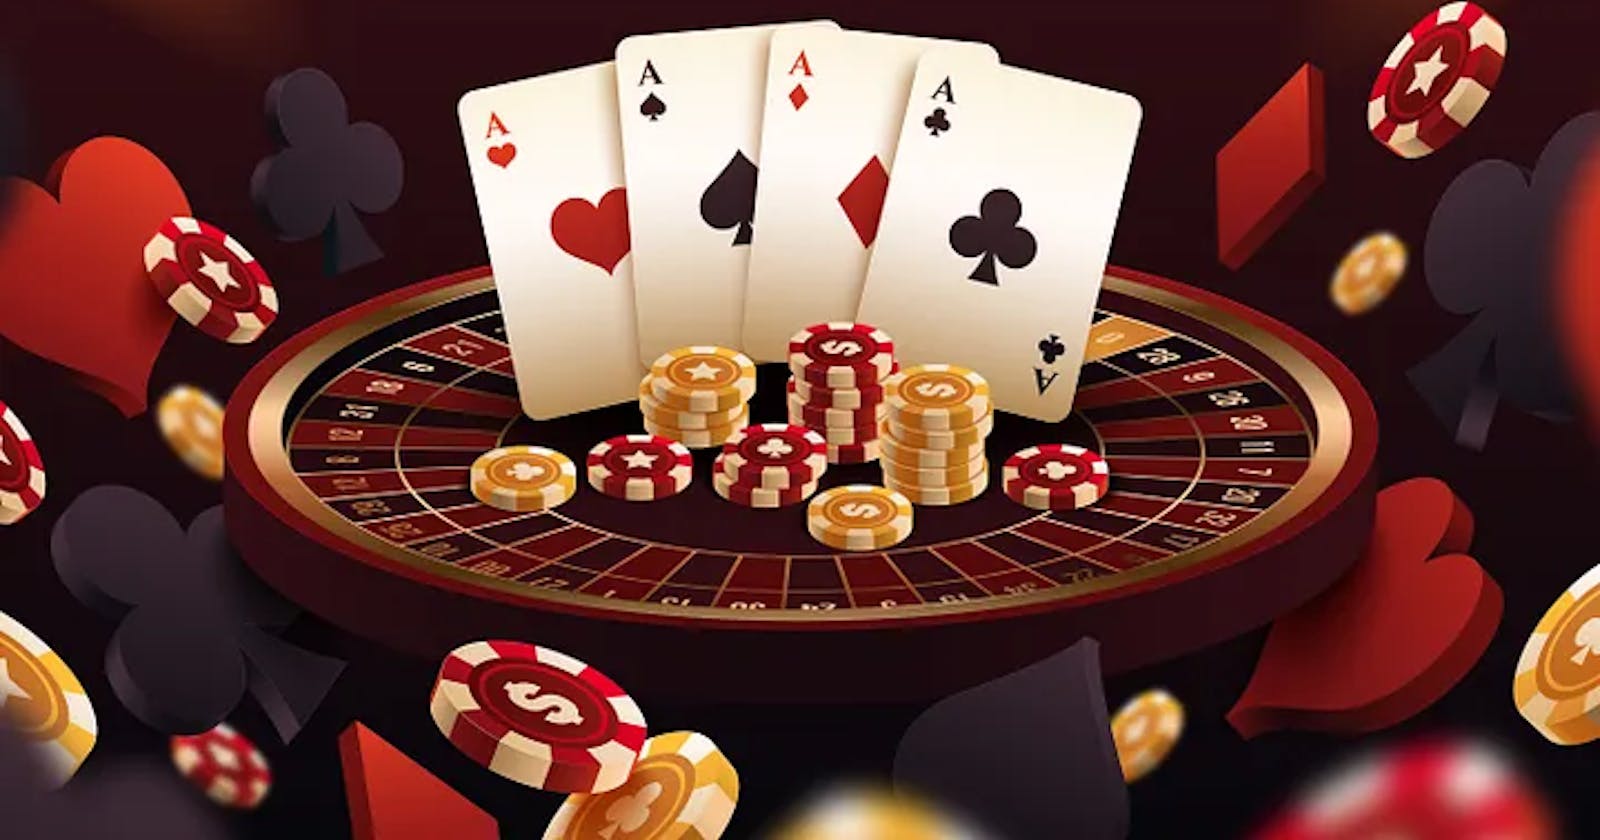 How to Choose the Right Casino Game Development Partner for Your Business